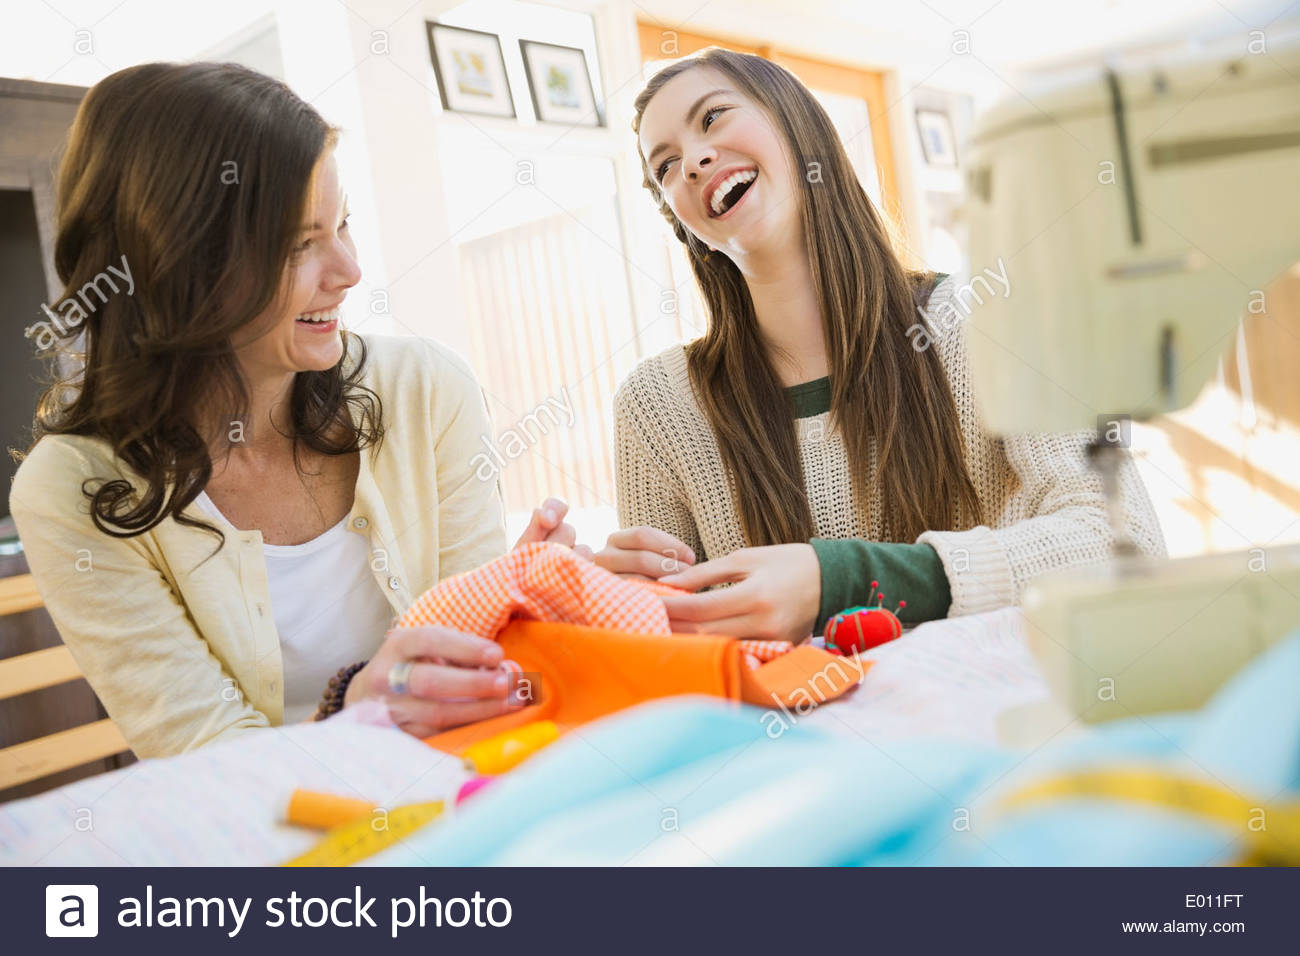 Mother teaching daughter to sew Stock Photo